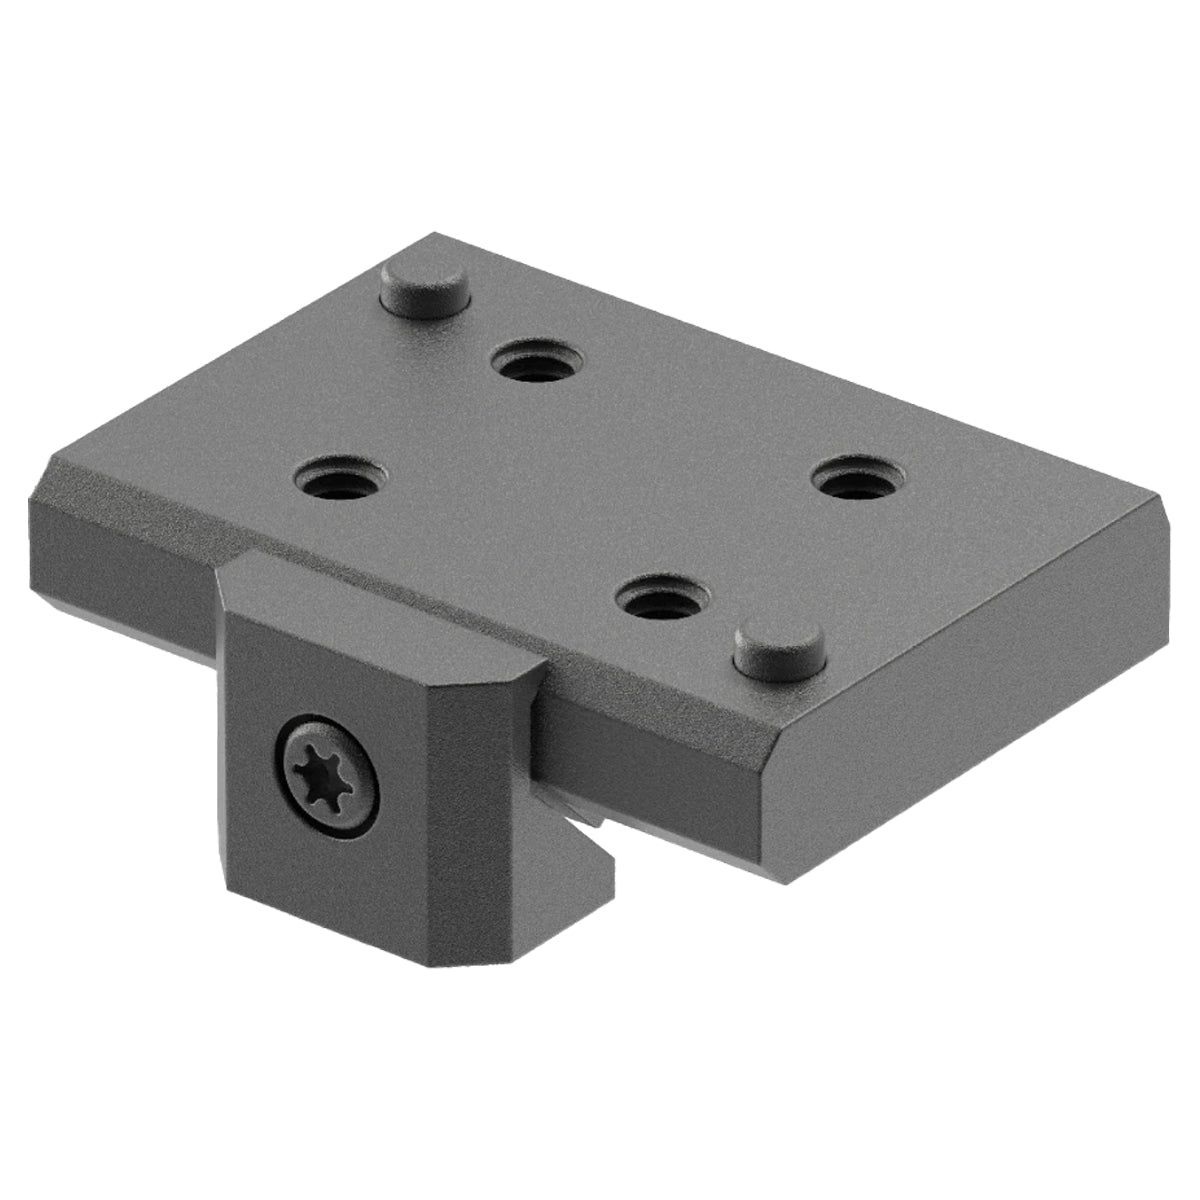 Leupold DeltaPoint Pro Cross-Slot Mount (120056) in  by GOHUNT | Leupold - GOHUNT Shop